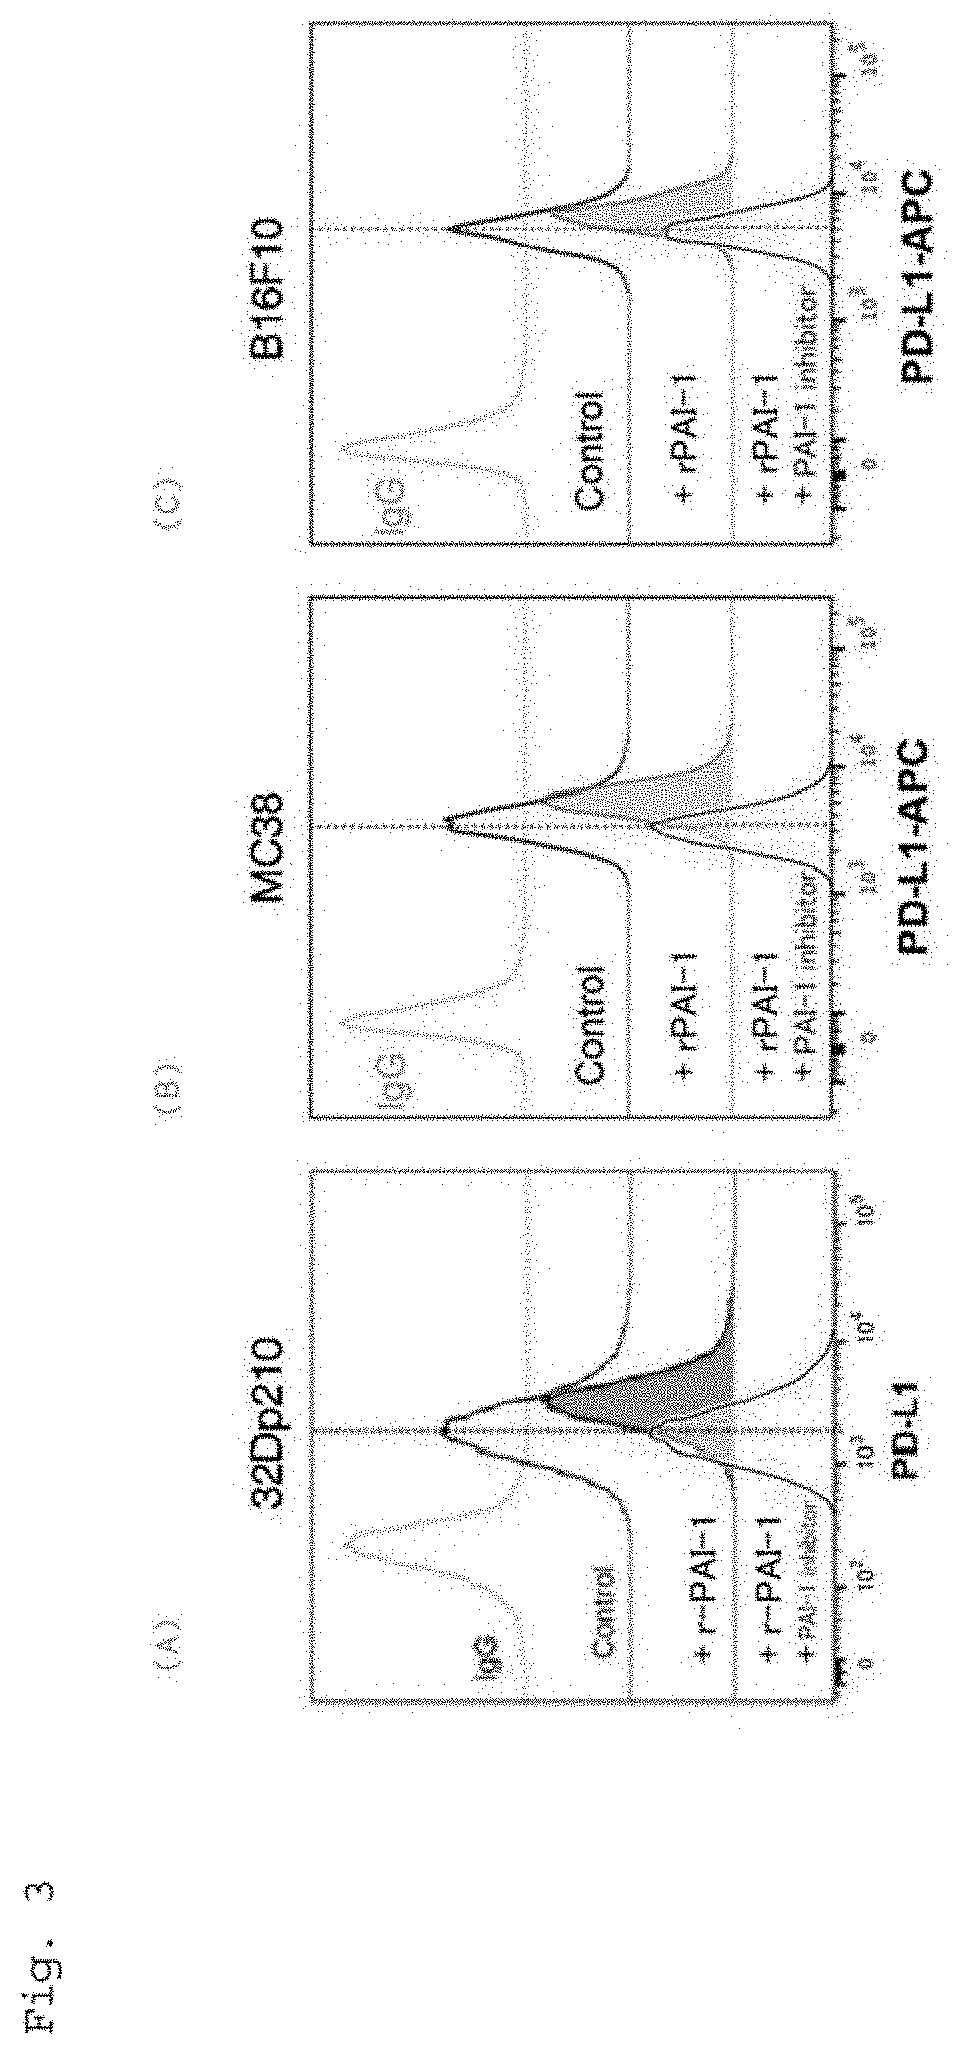 Inhibitor against expression of immune checkpoint molecule